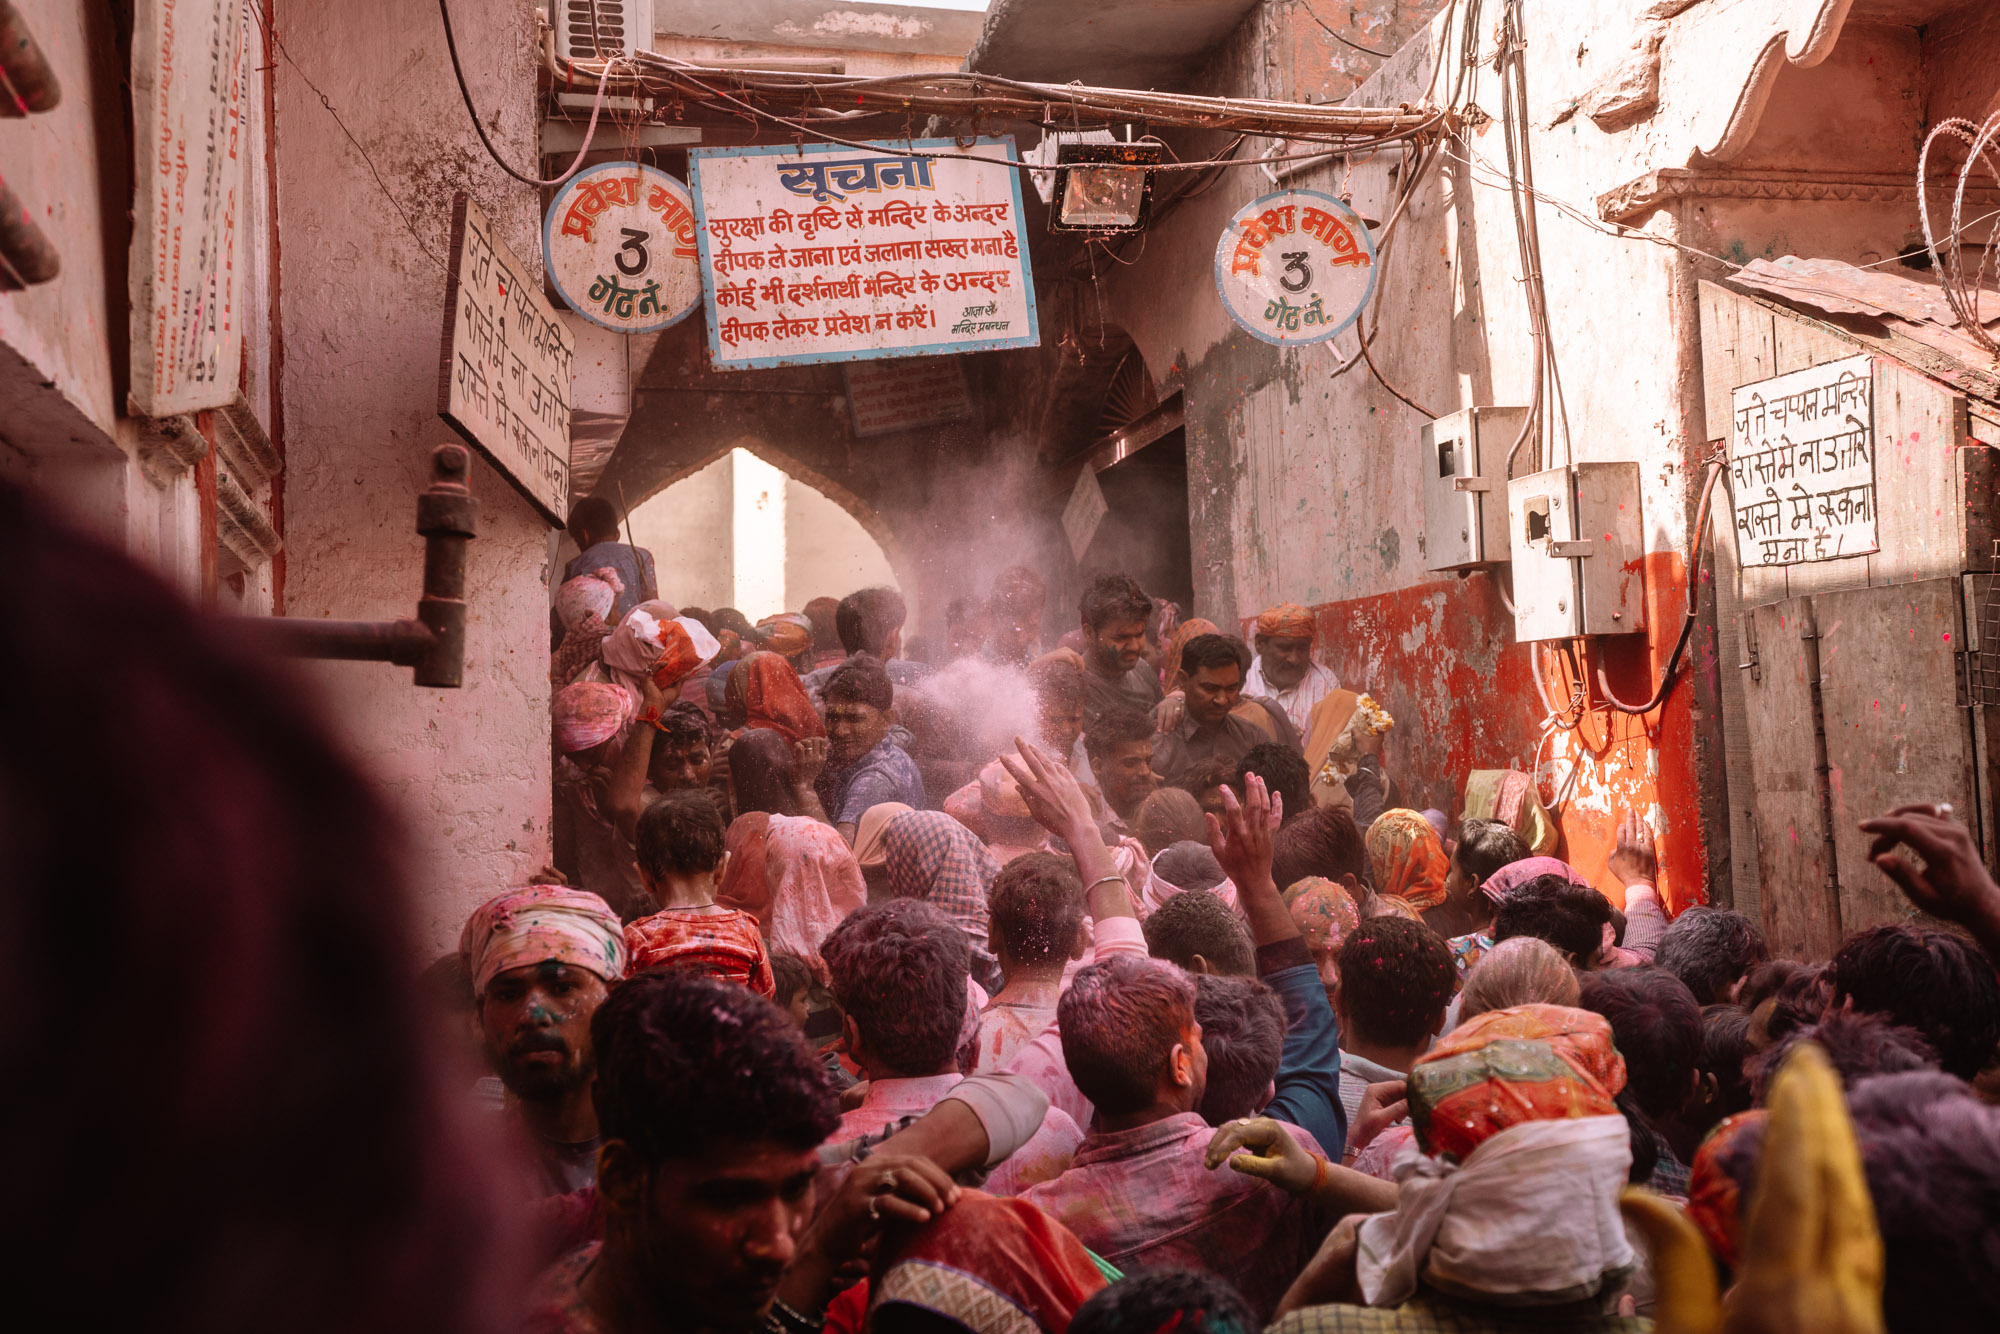 A crowd of people covered with colorful powder during the celebration of Holi Festival in Vrindavan, India via @finduslost